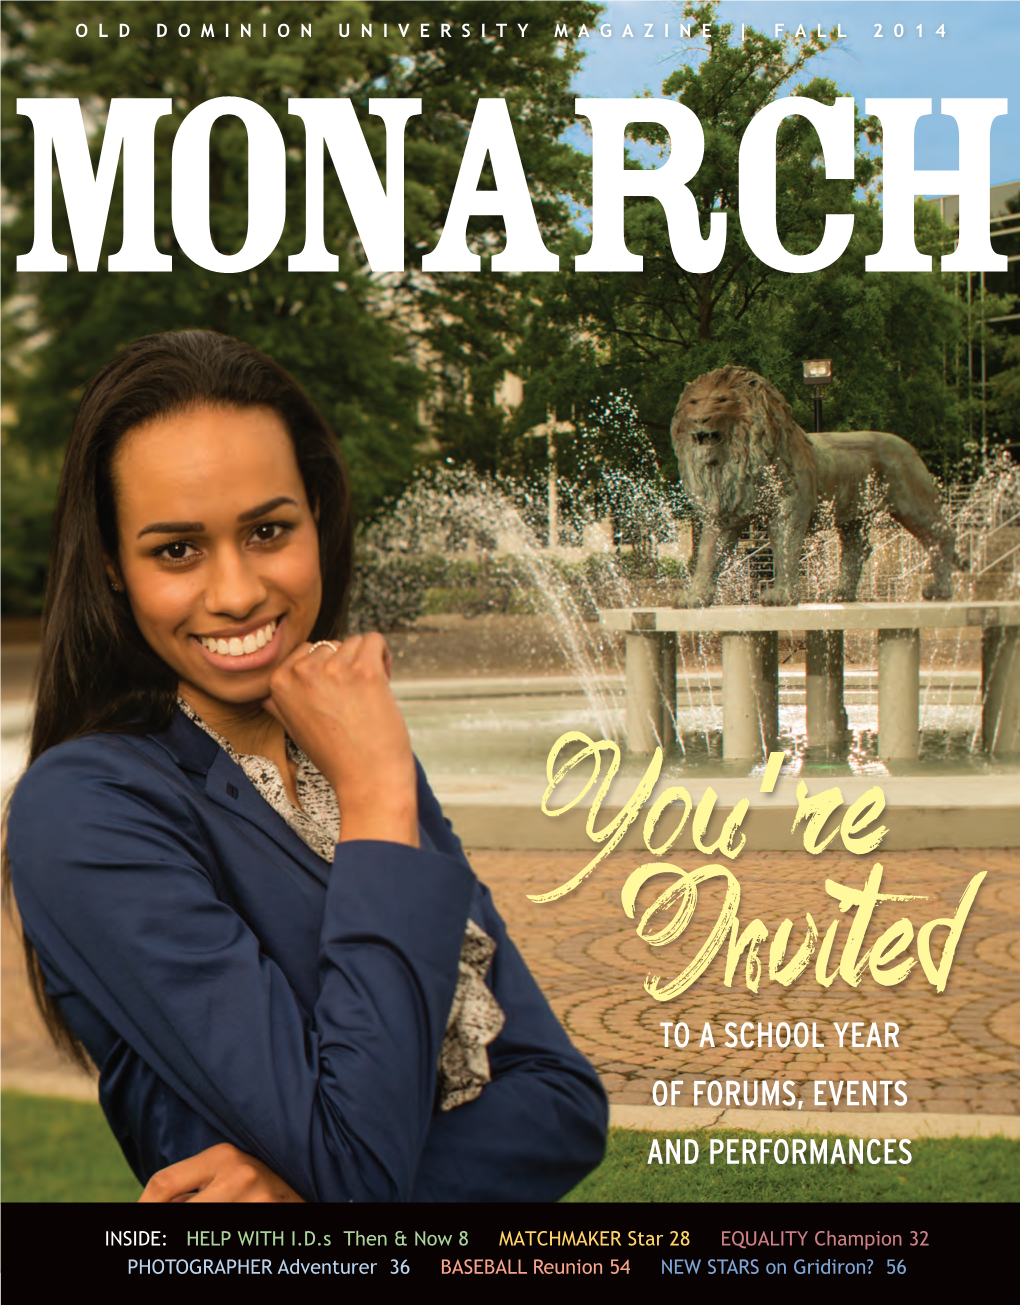 Monarch Magazine Appeared in the Spring of 2011